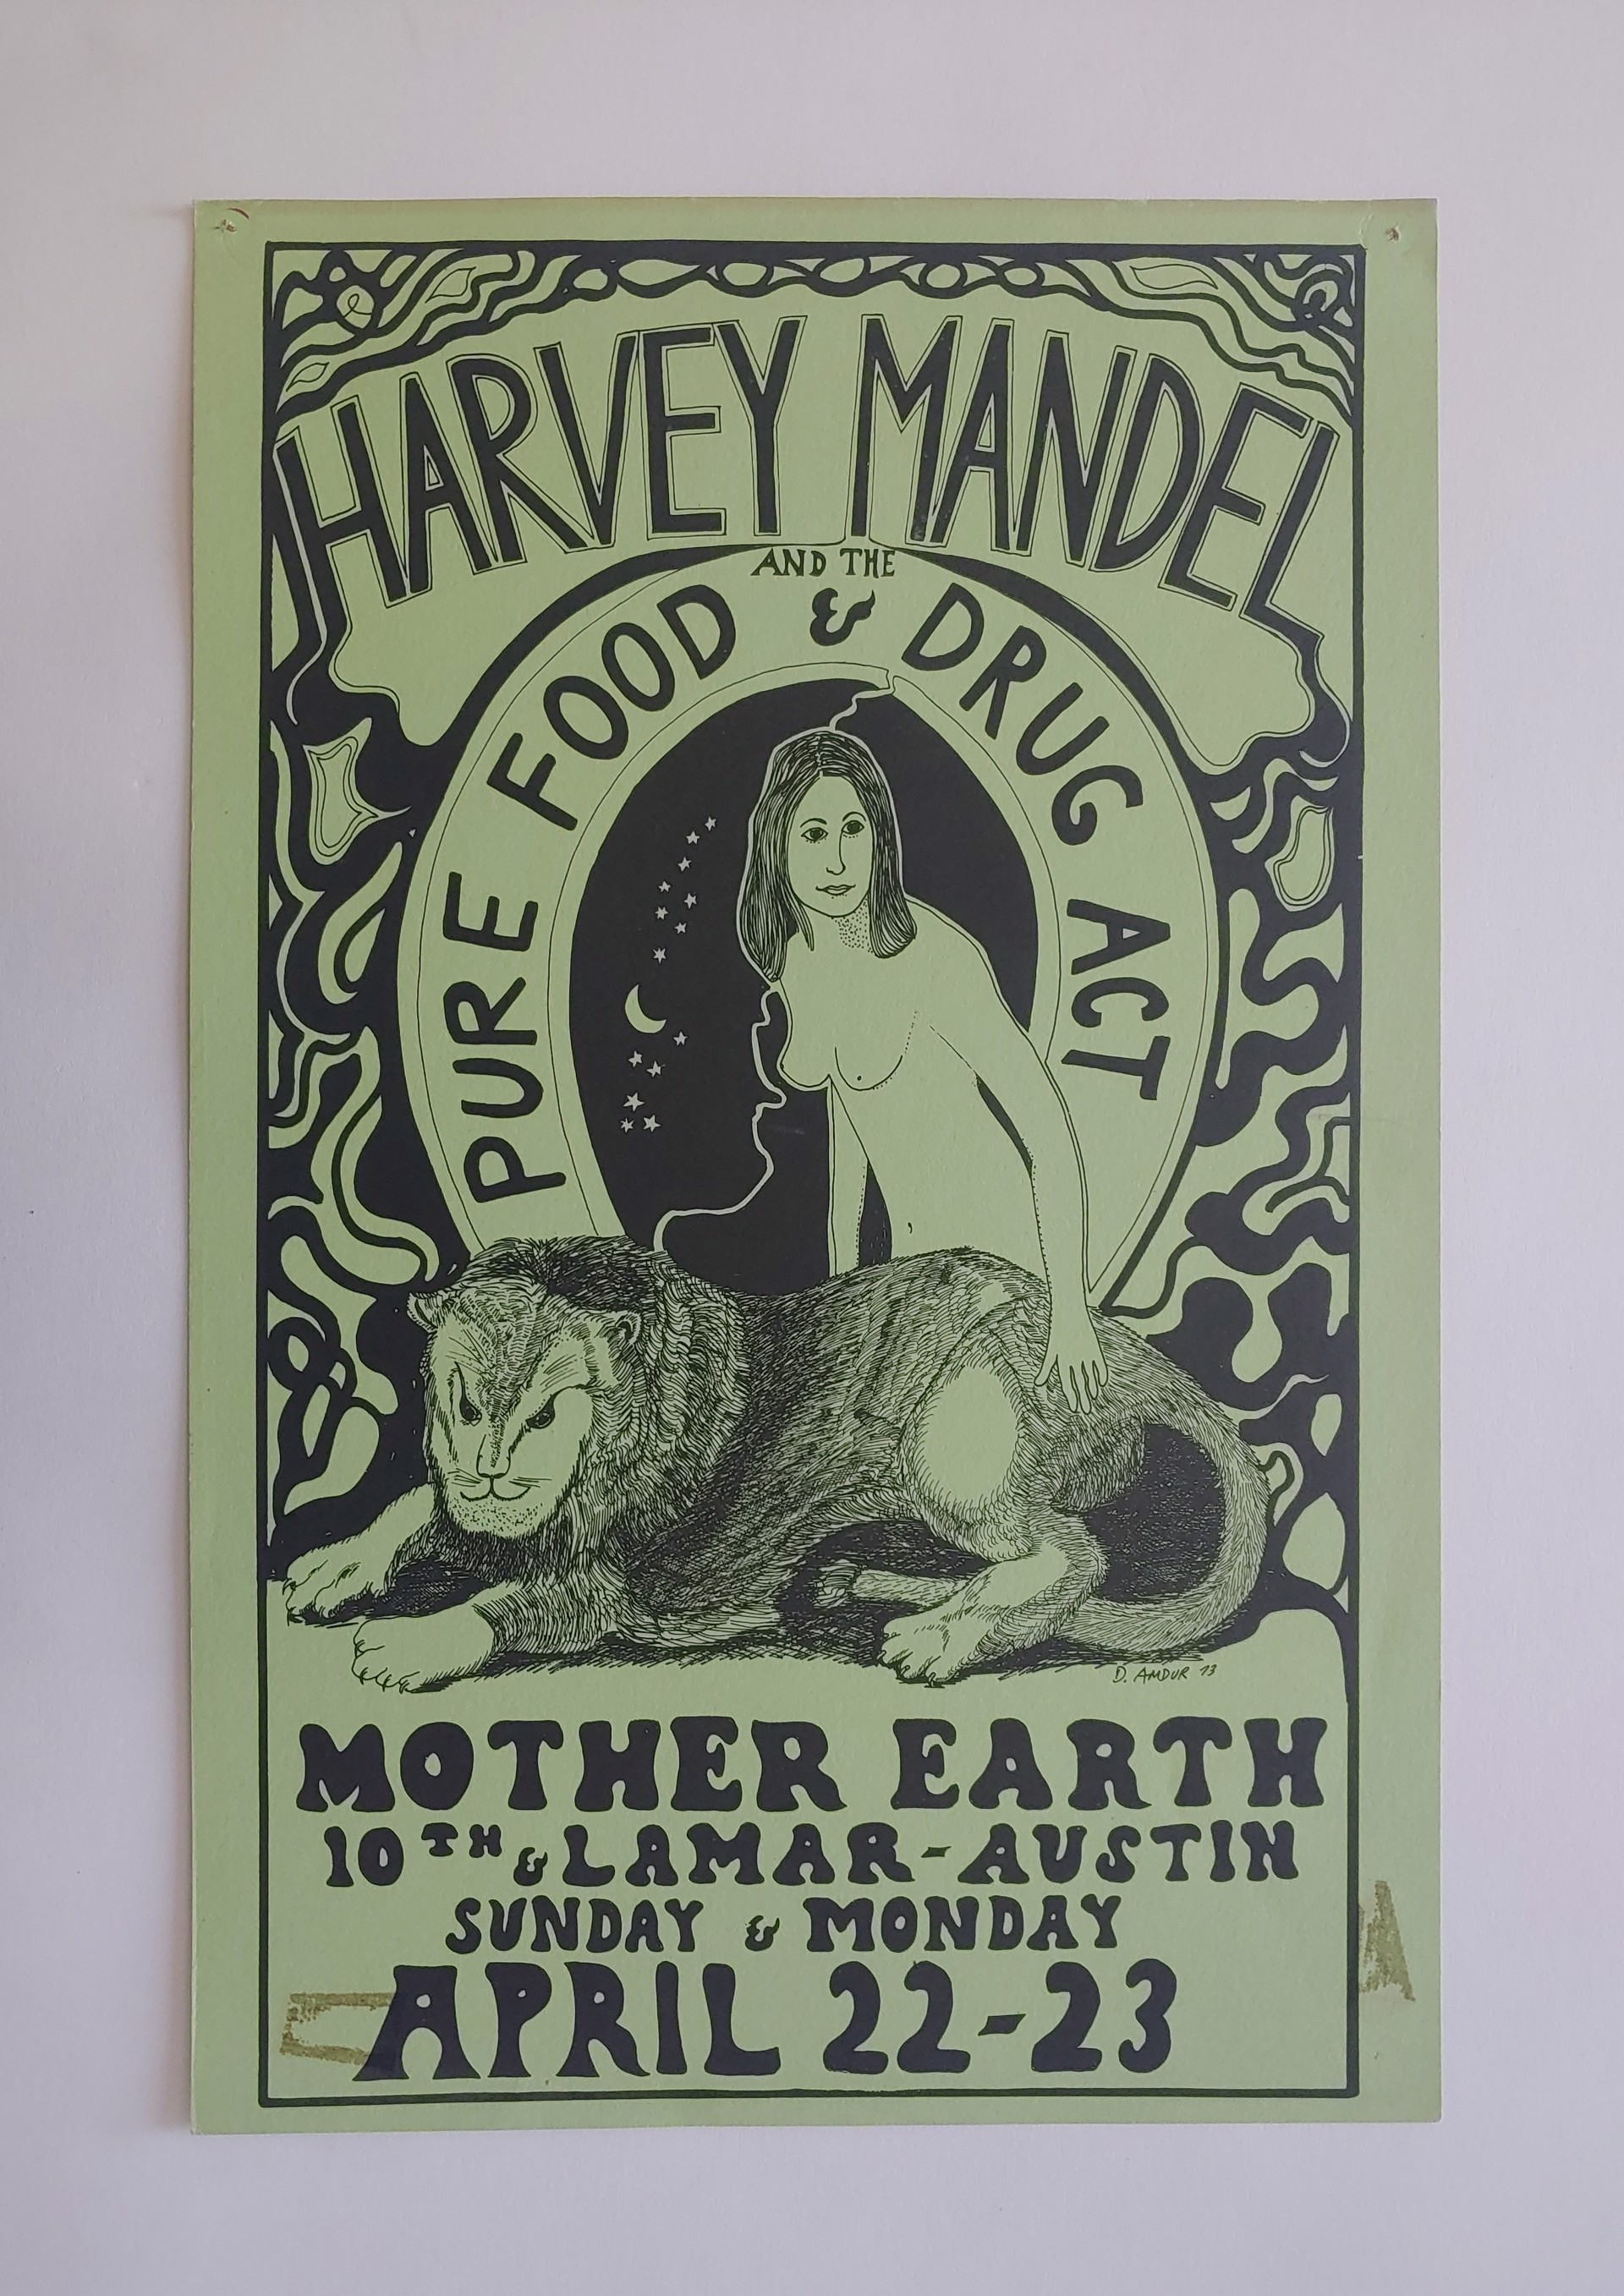 Harvey Mandel and the Pure Food & Drug Act Posters by David Amdur